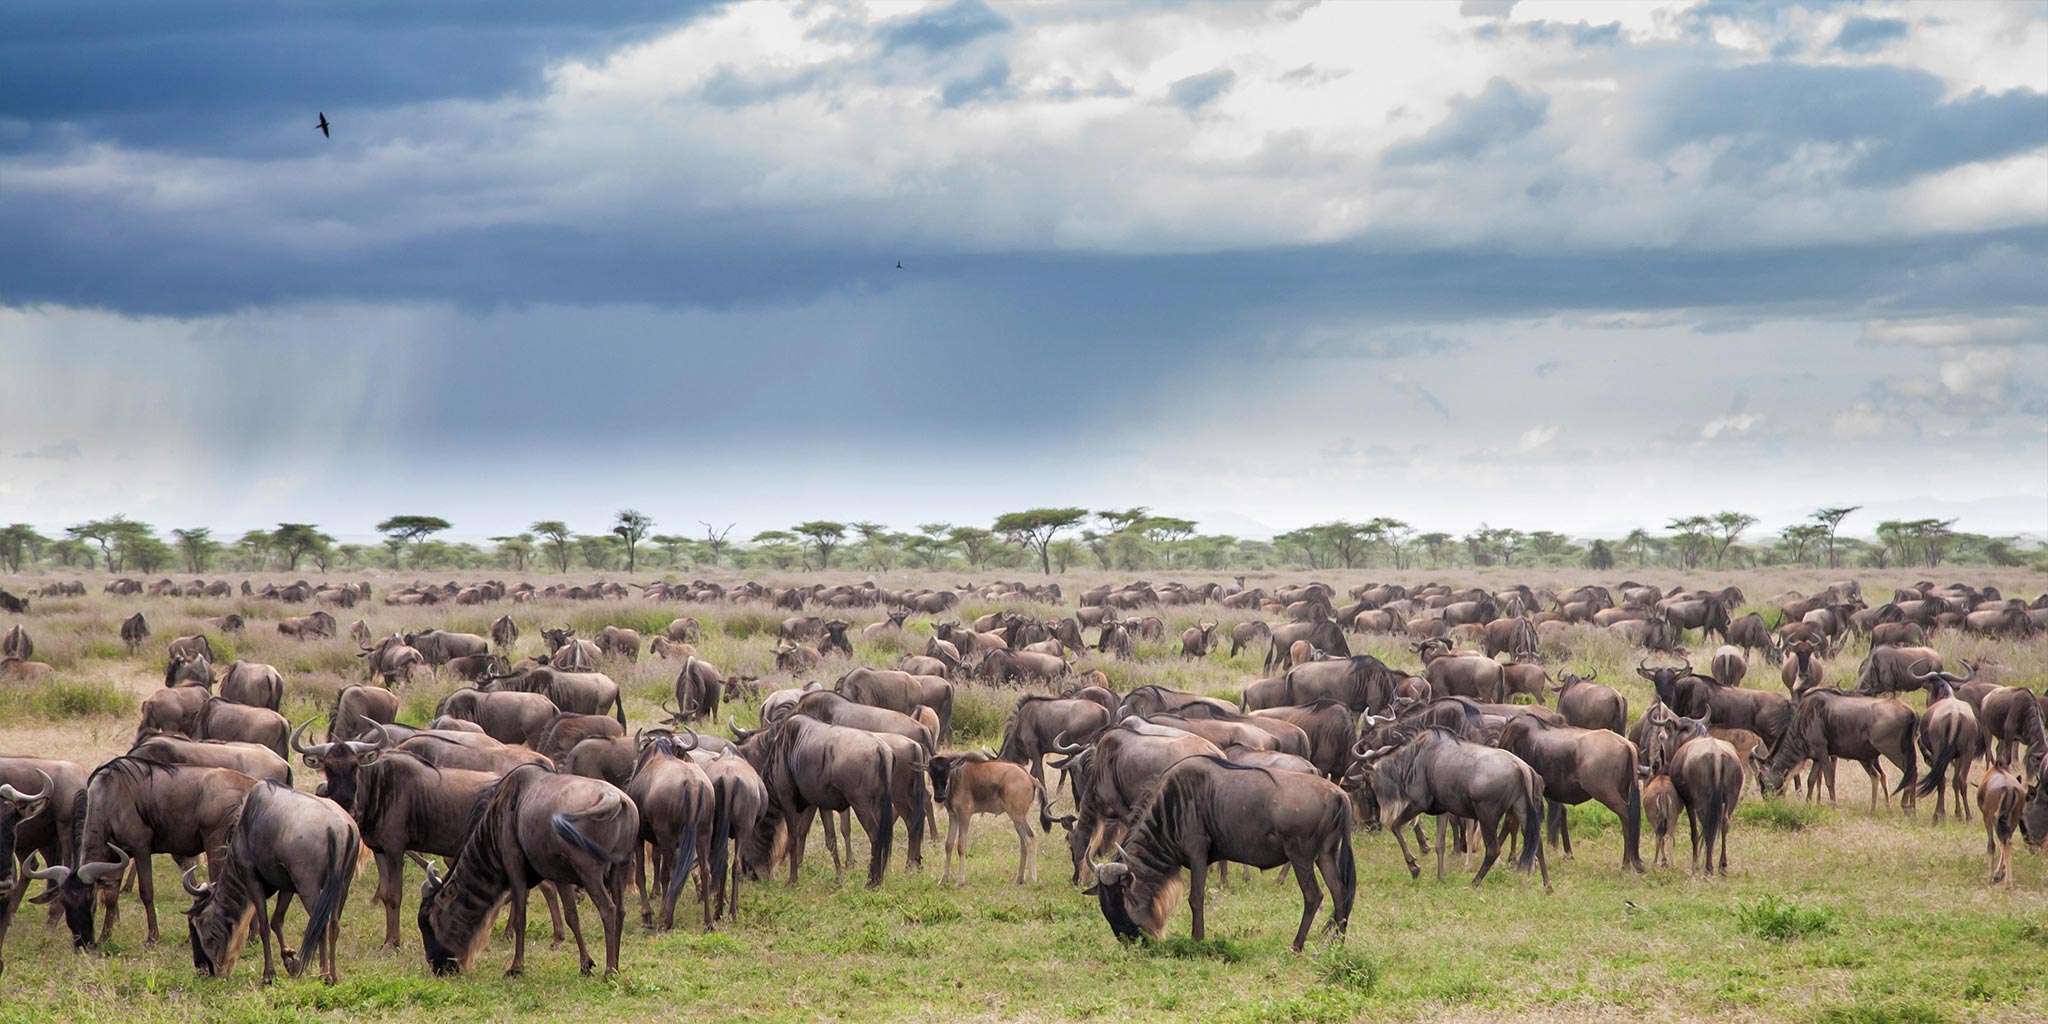 We can get you the best seats in the house to see the Great Migration in action